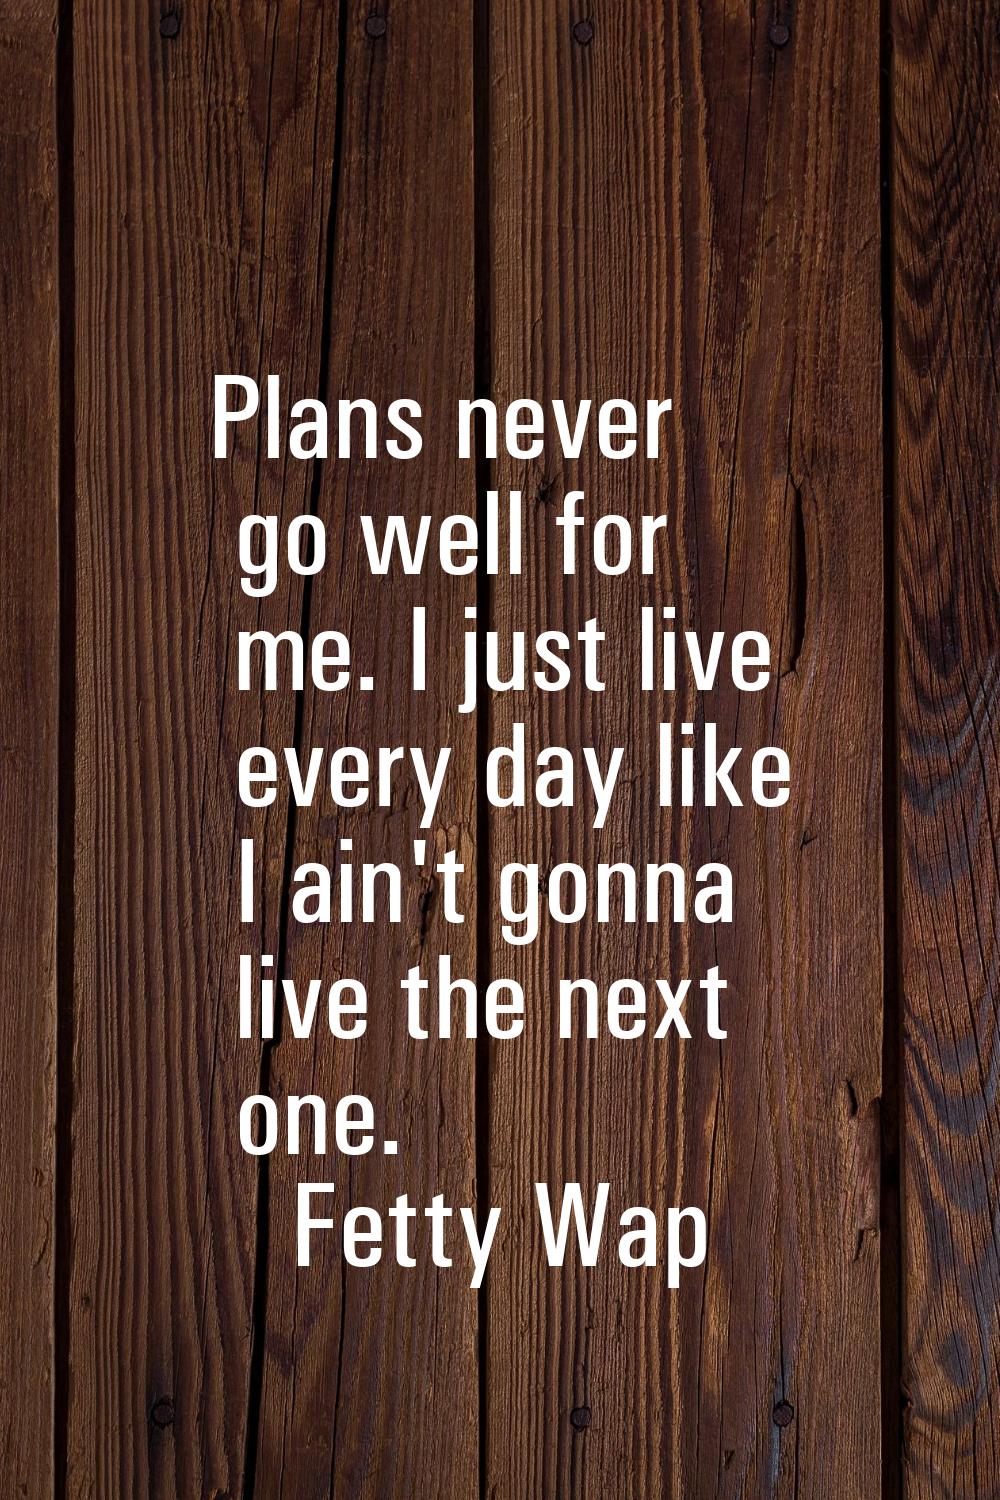 Plans never go well for me. I just live every day like I ain't gonna live the next one.